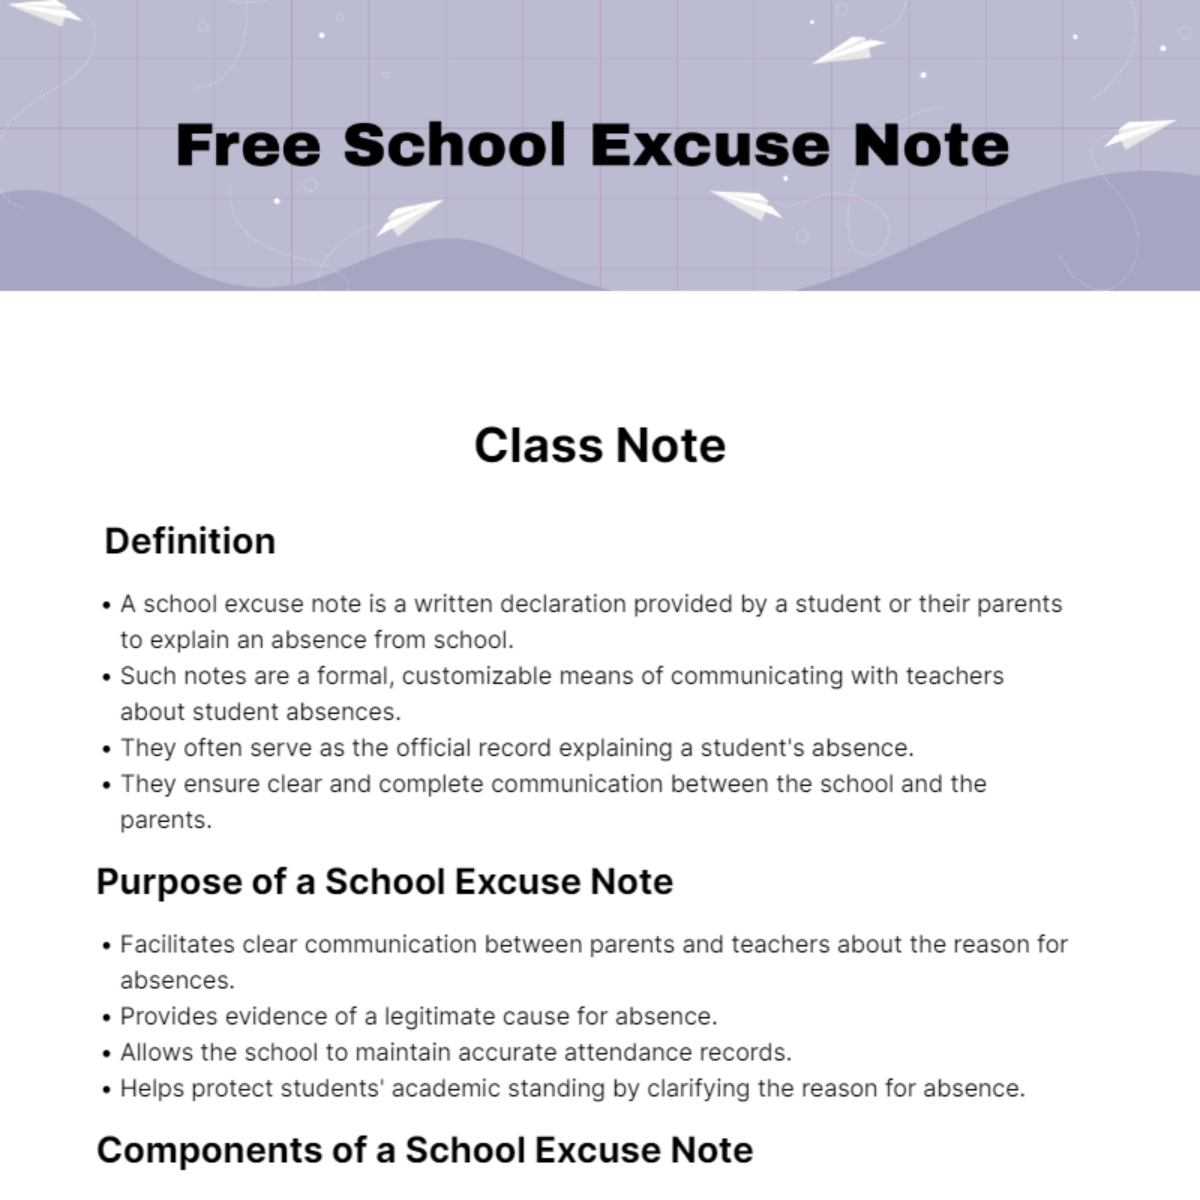 School Excuse Note Template